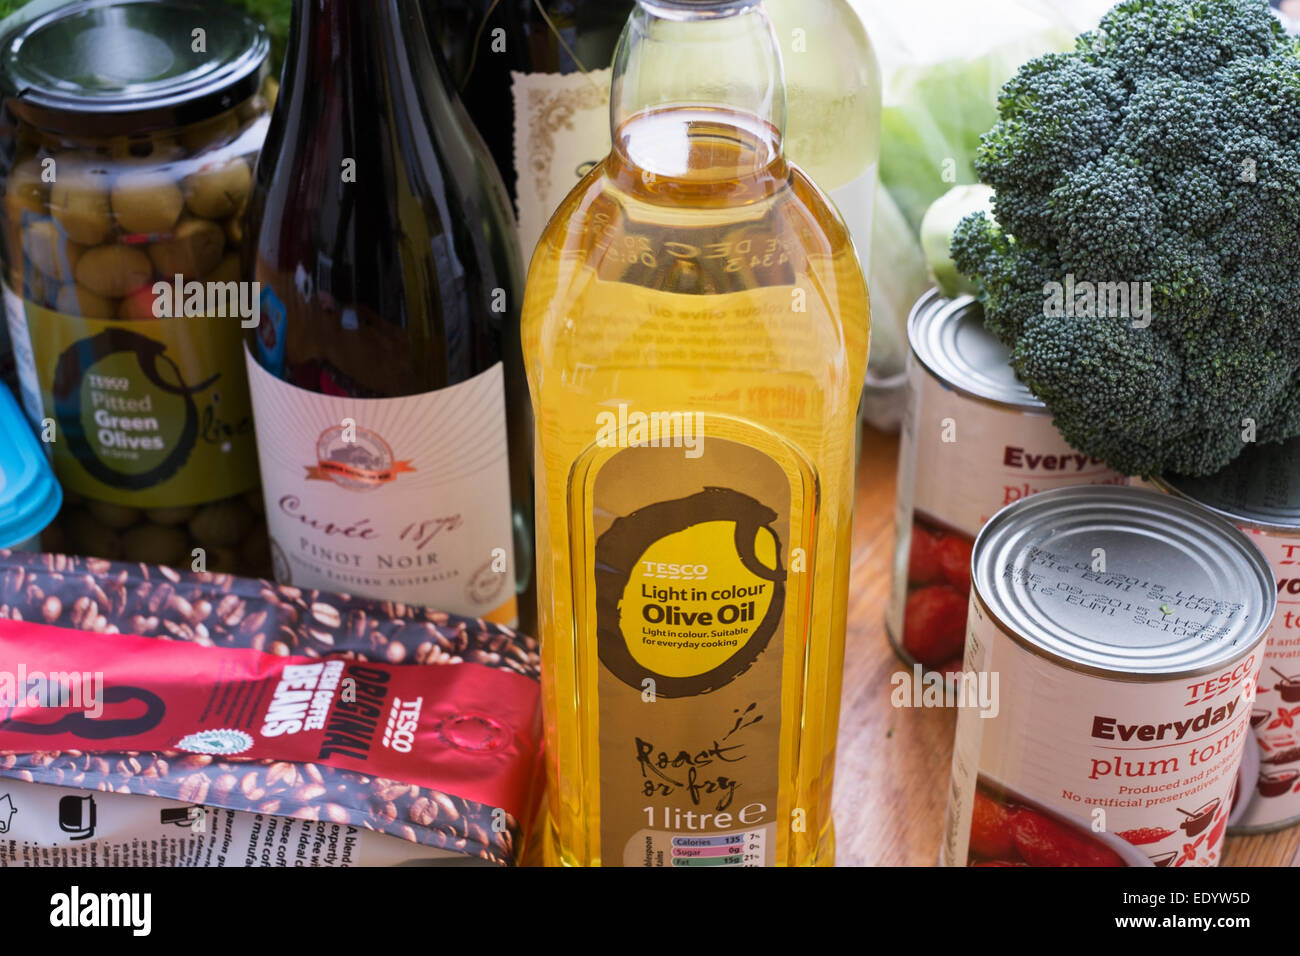 The weekly food shop: a variety of food items purchased at Tesco supermarket - some which are Tesco's own brand. Stock Photo